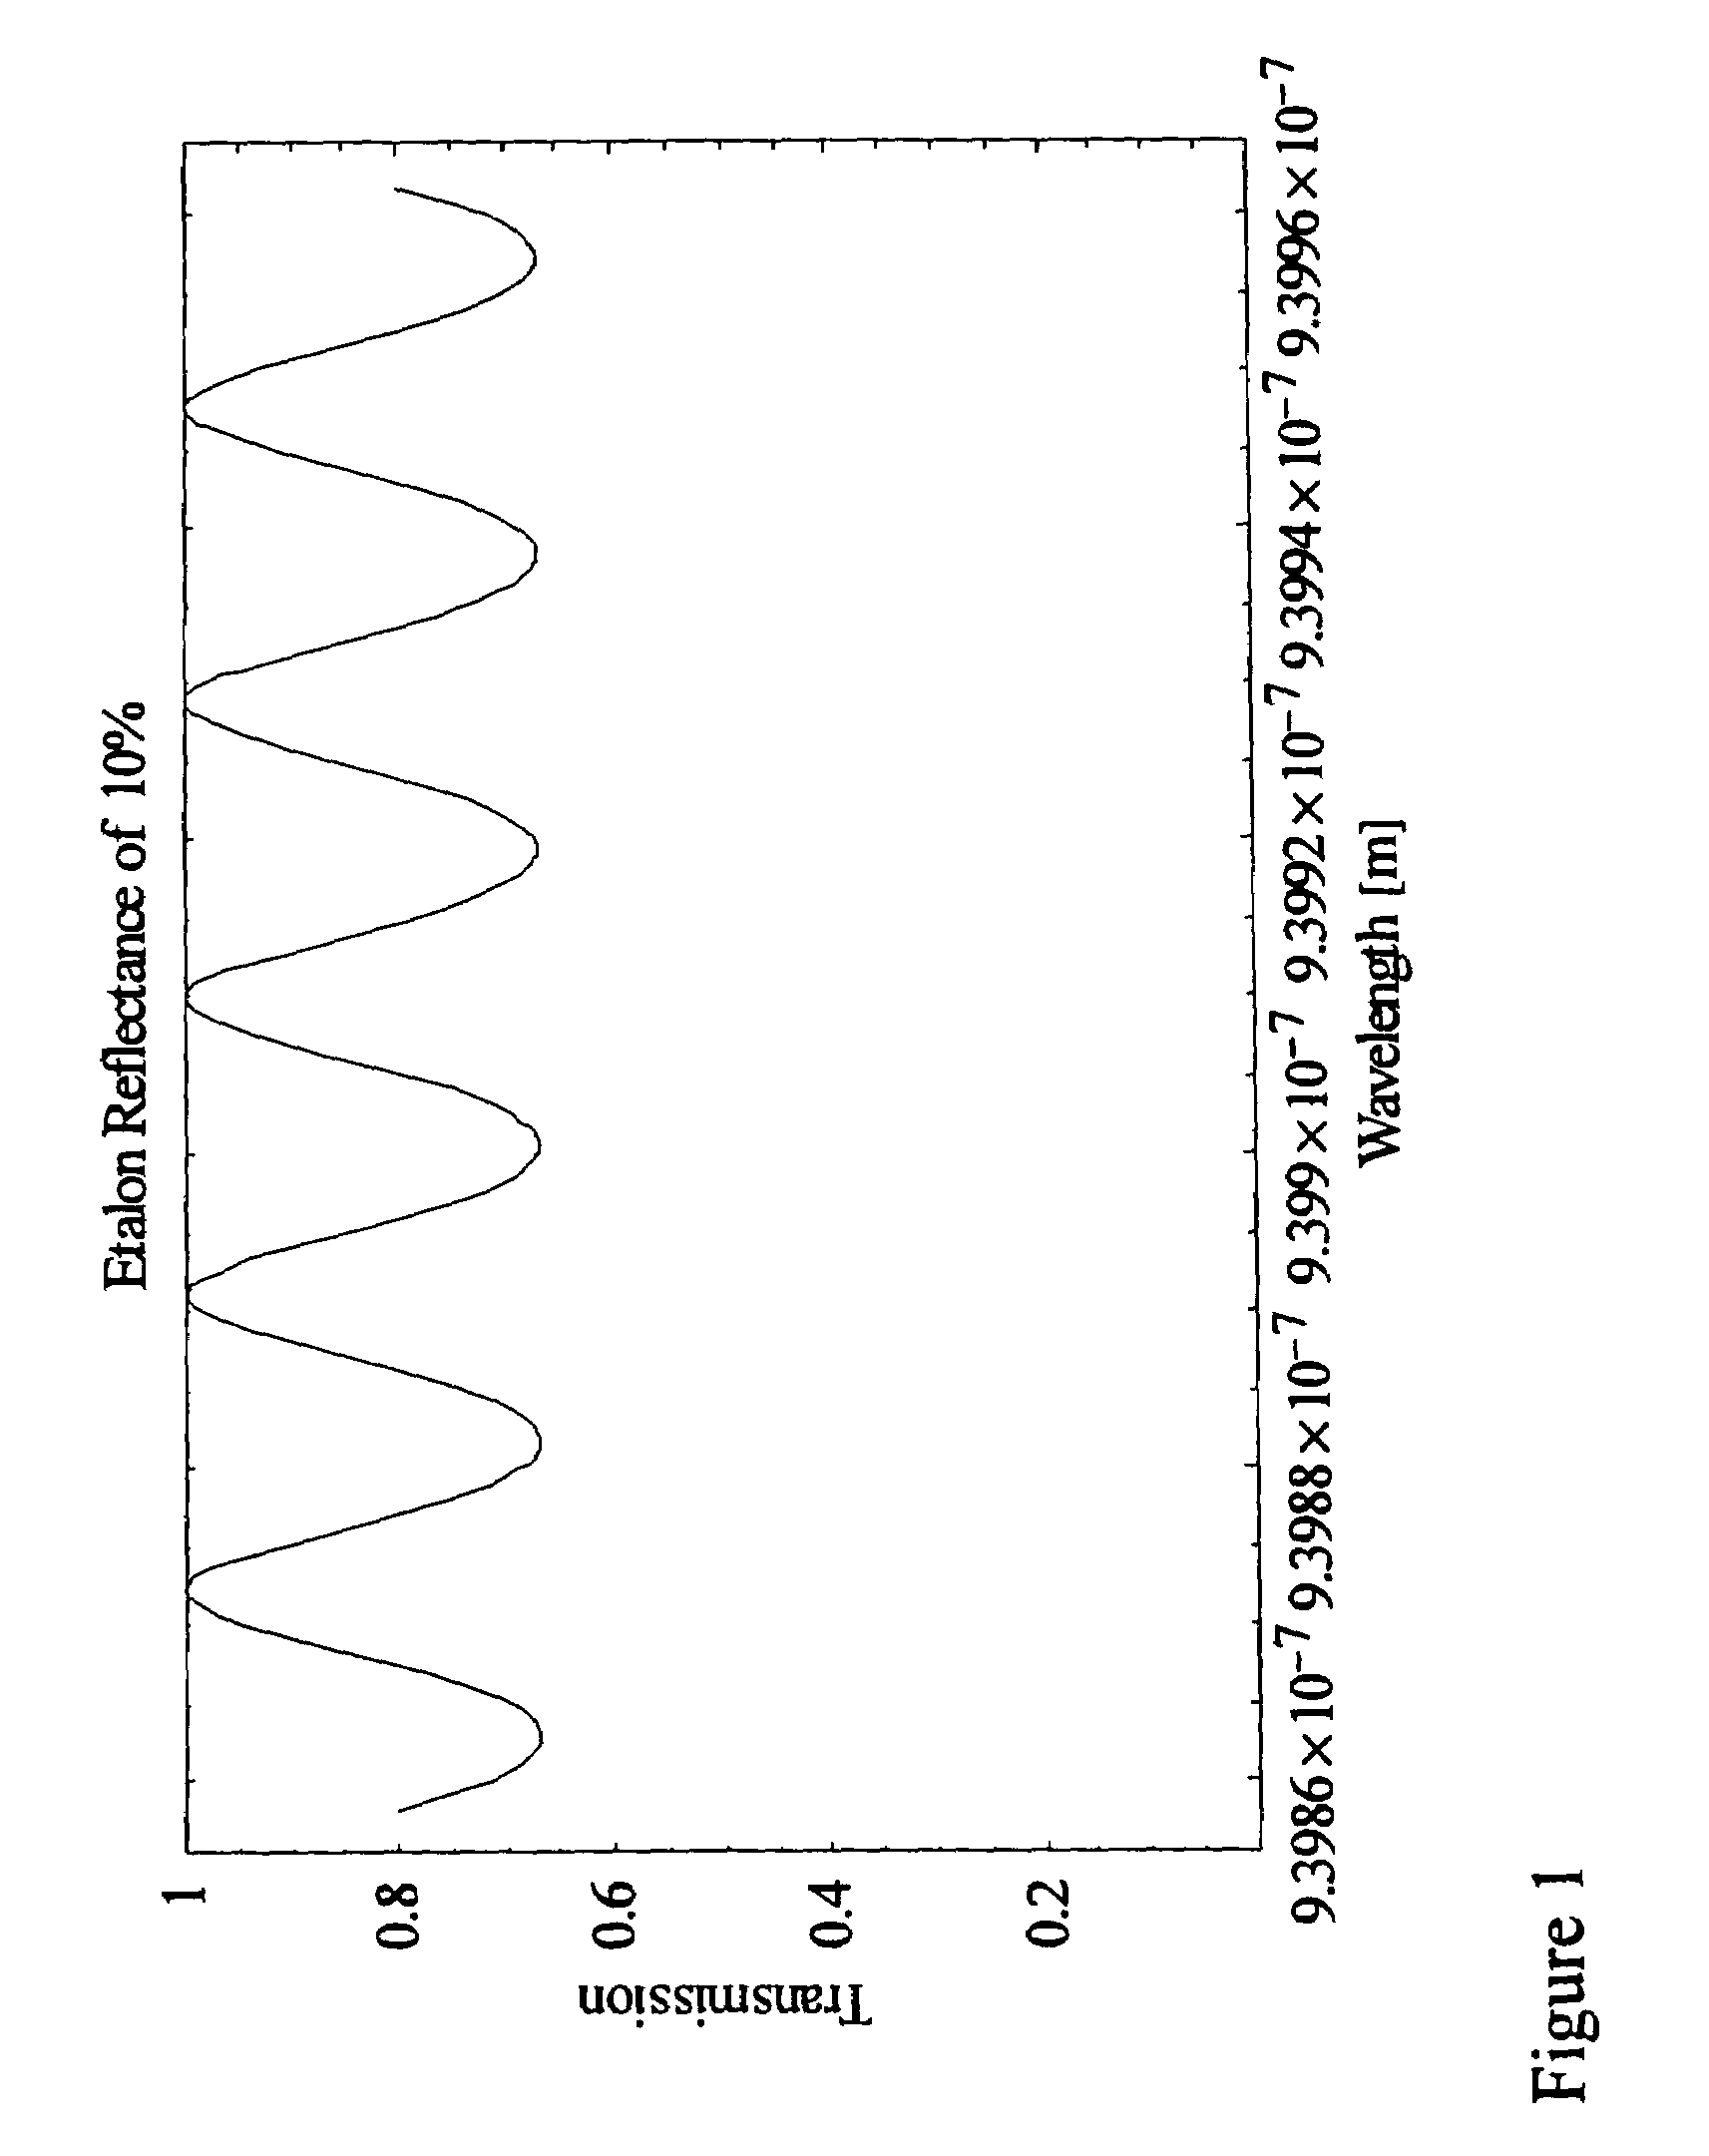 Device for optical monitoring of constituent in tissue or body fluid sample using wavelength modulation spectroscopy, such as for blood glucose levels